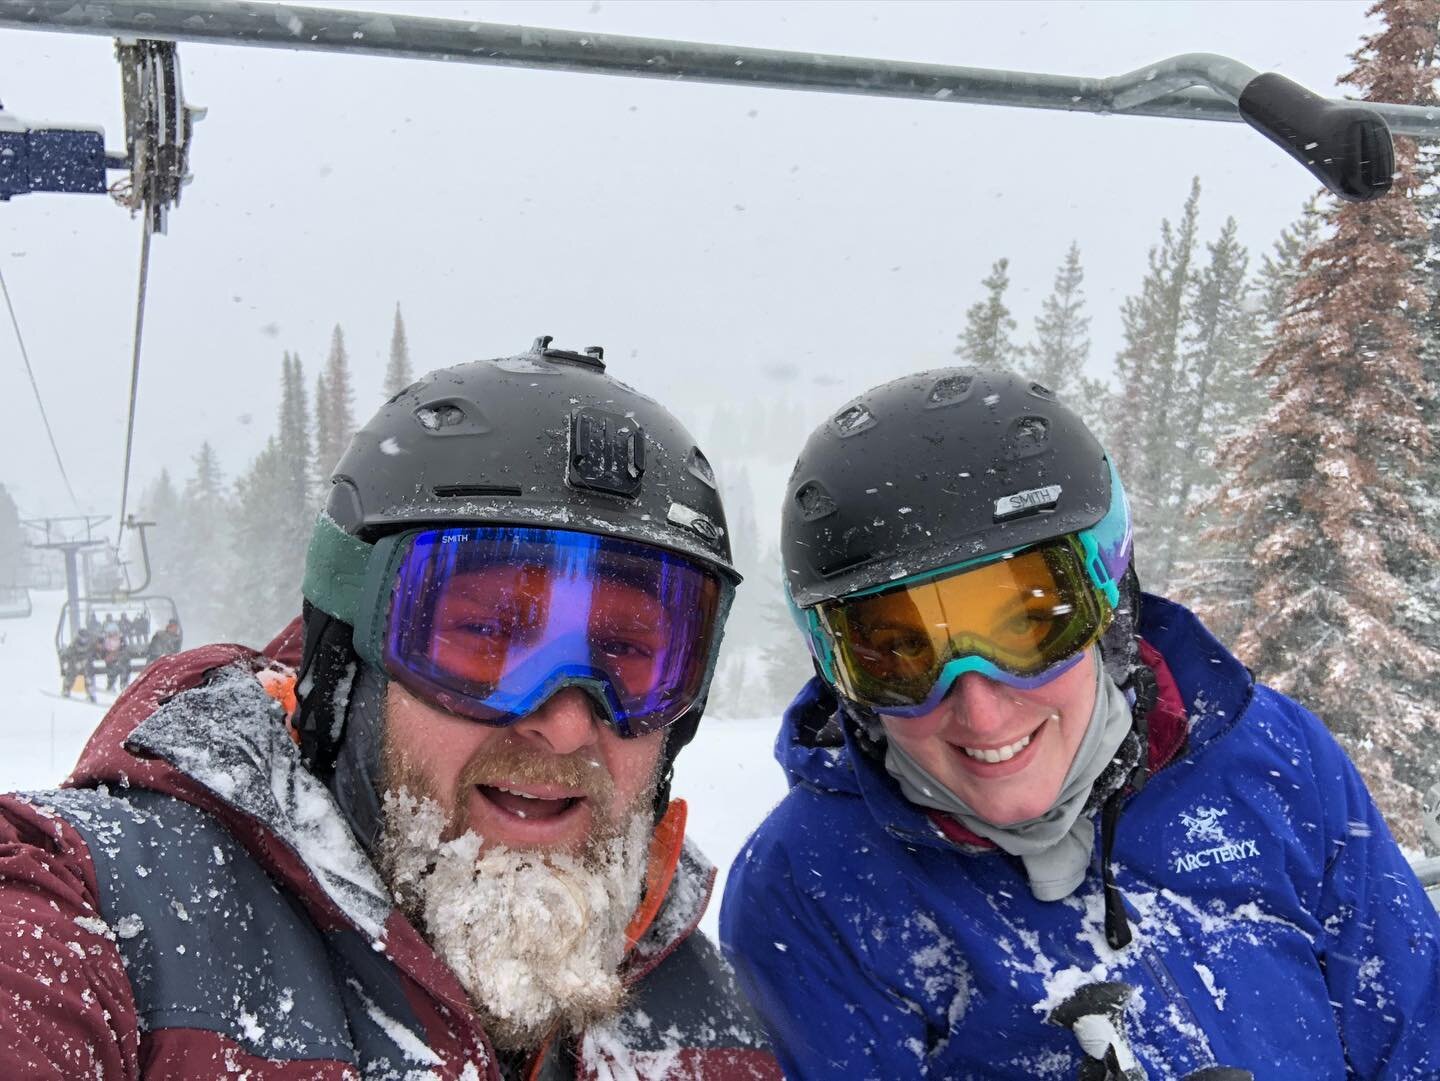 Wrapped up a fun 3 days @schweitzer_mountain and loved every minute. Fresh snow and lots of great turns. We&rsquo;ll definitely be back soon. 
-
Front row side by side parking at the mountain was great! Wish we had the Ranger with us. ⛷⛷🏔🚐🎿🛺
-
#S